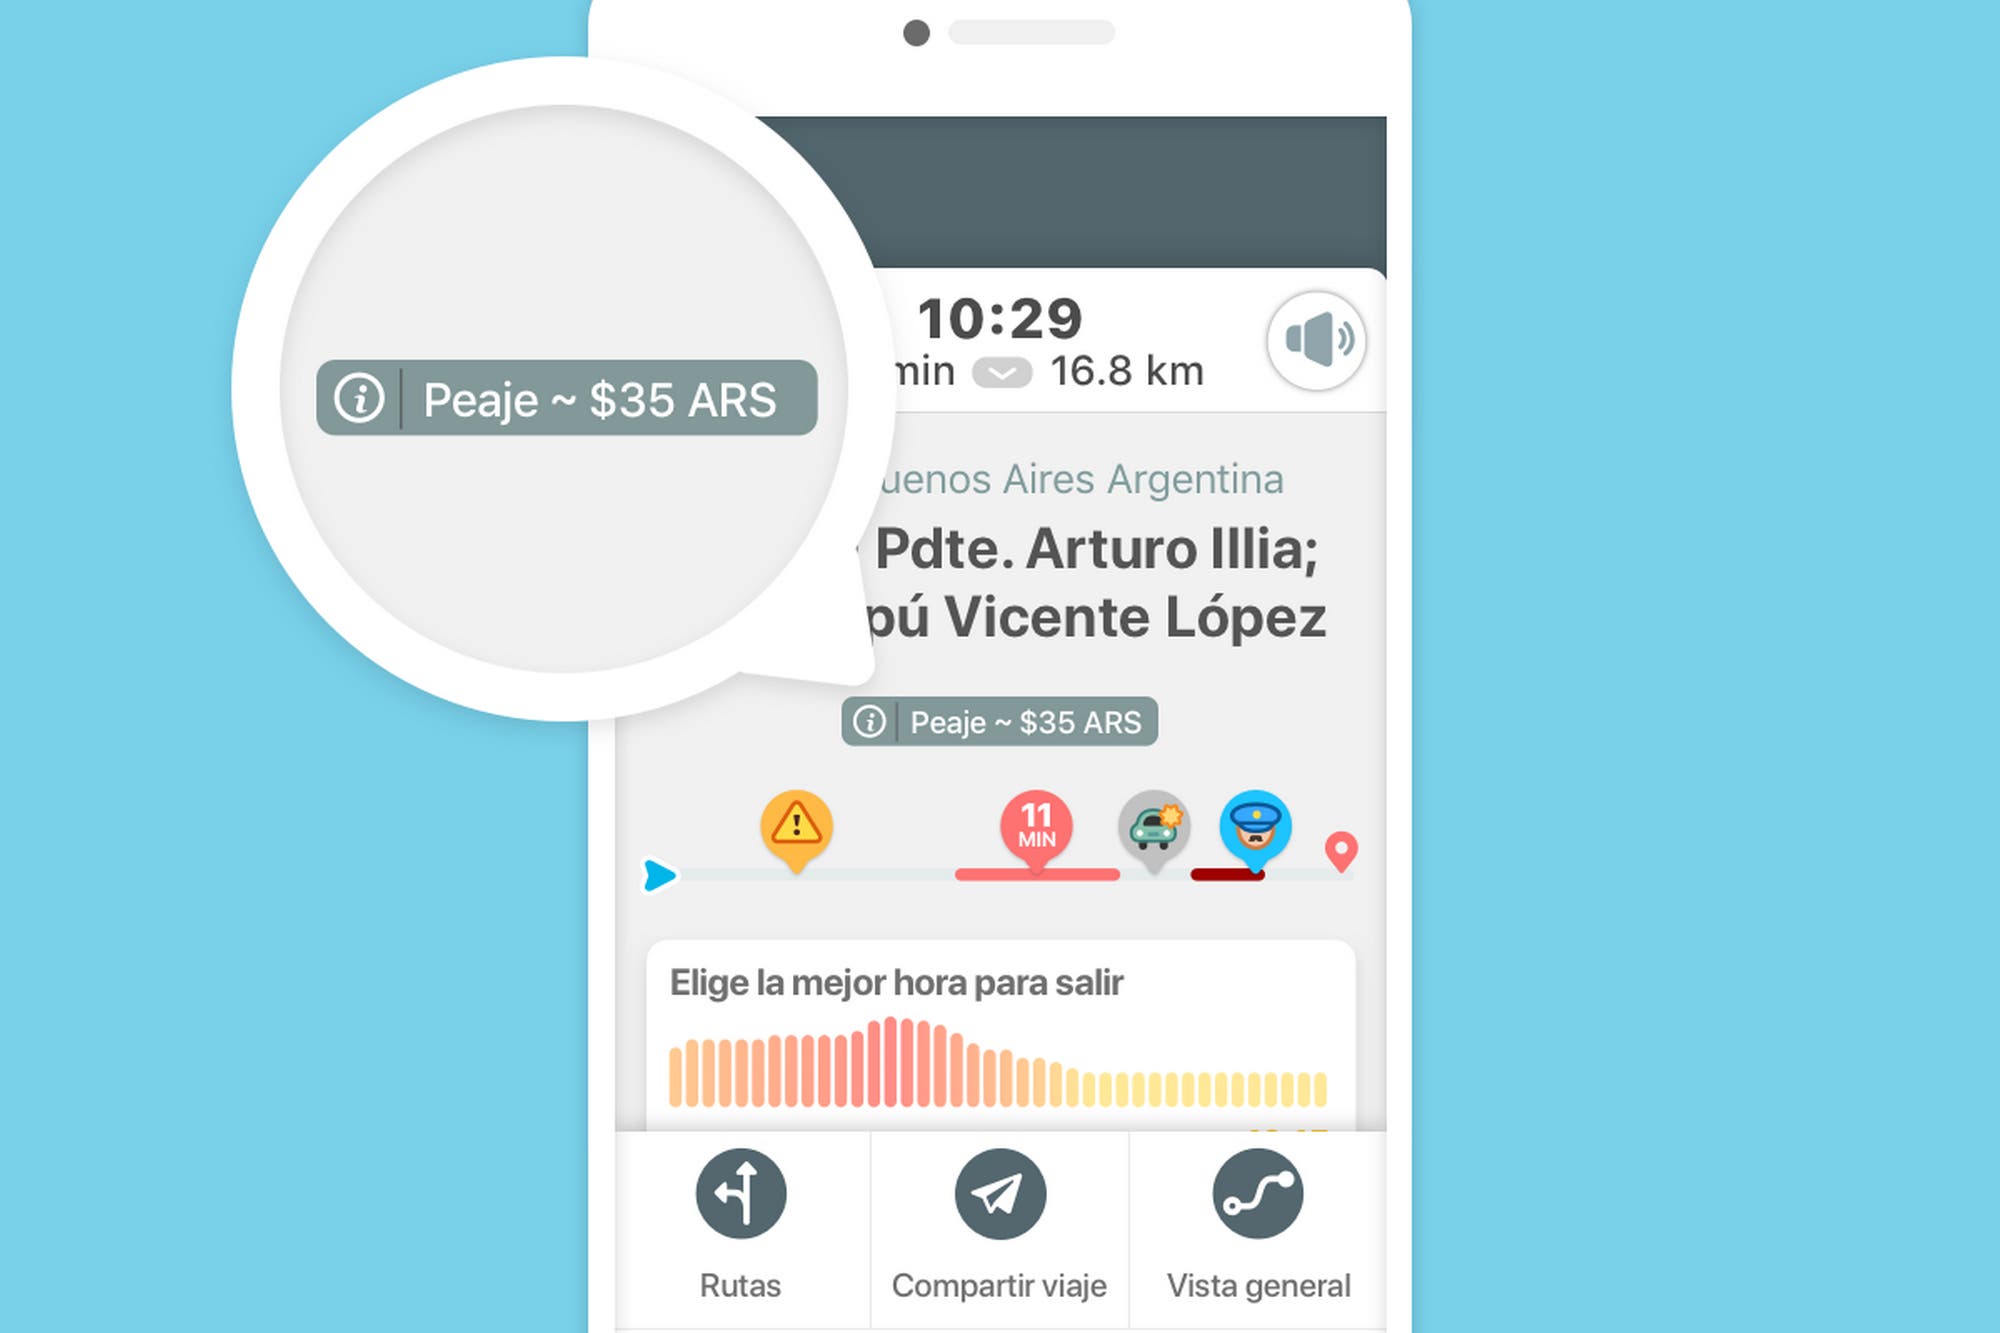 Waze now allows you to check and compare toll prices for your trips